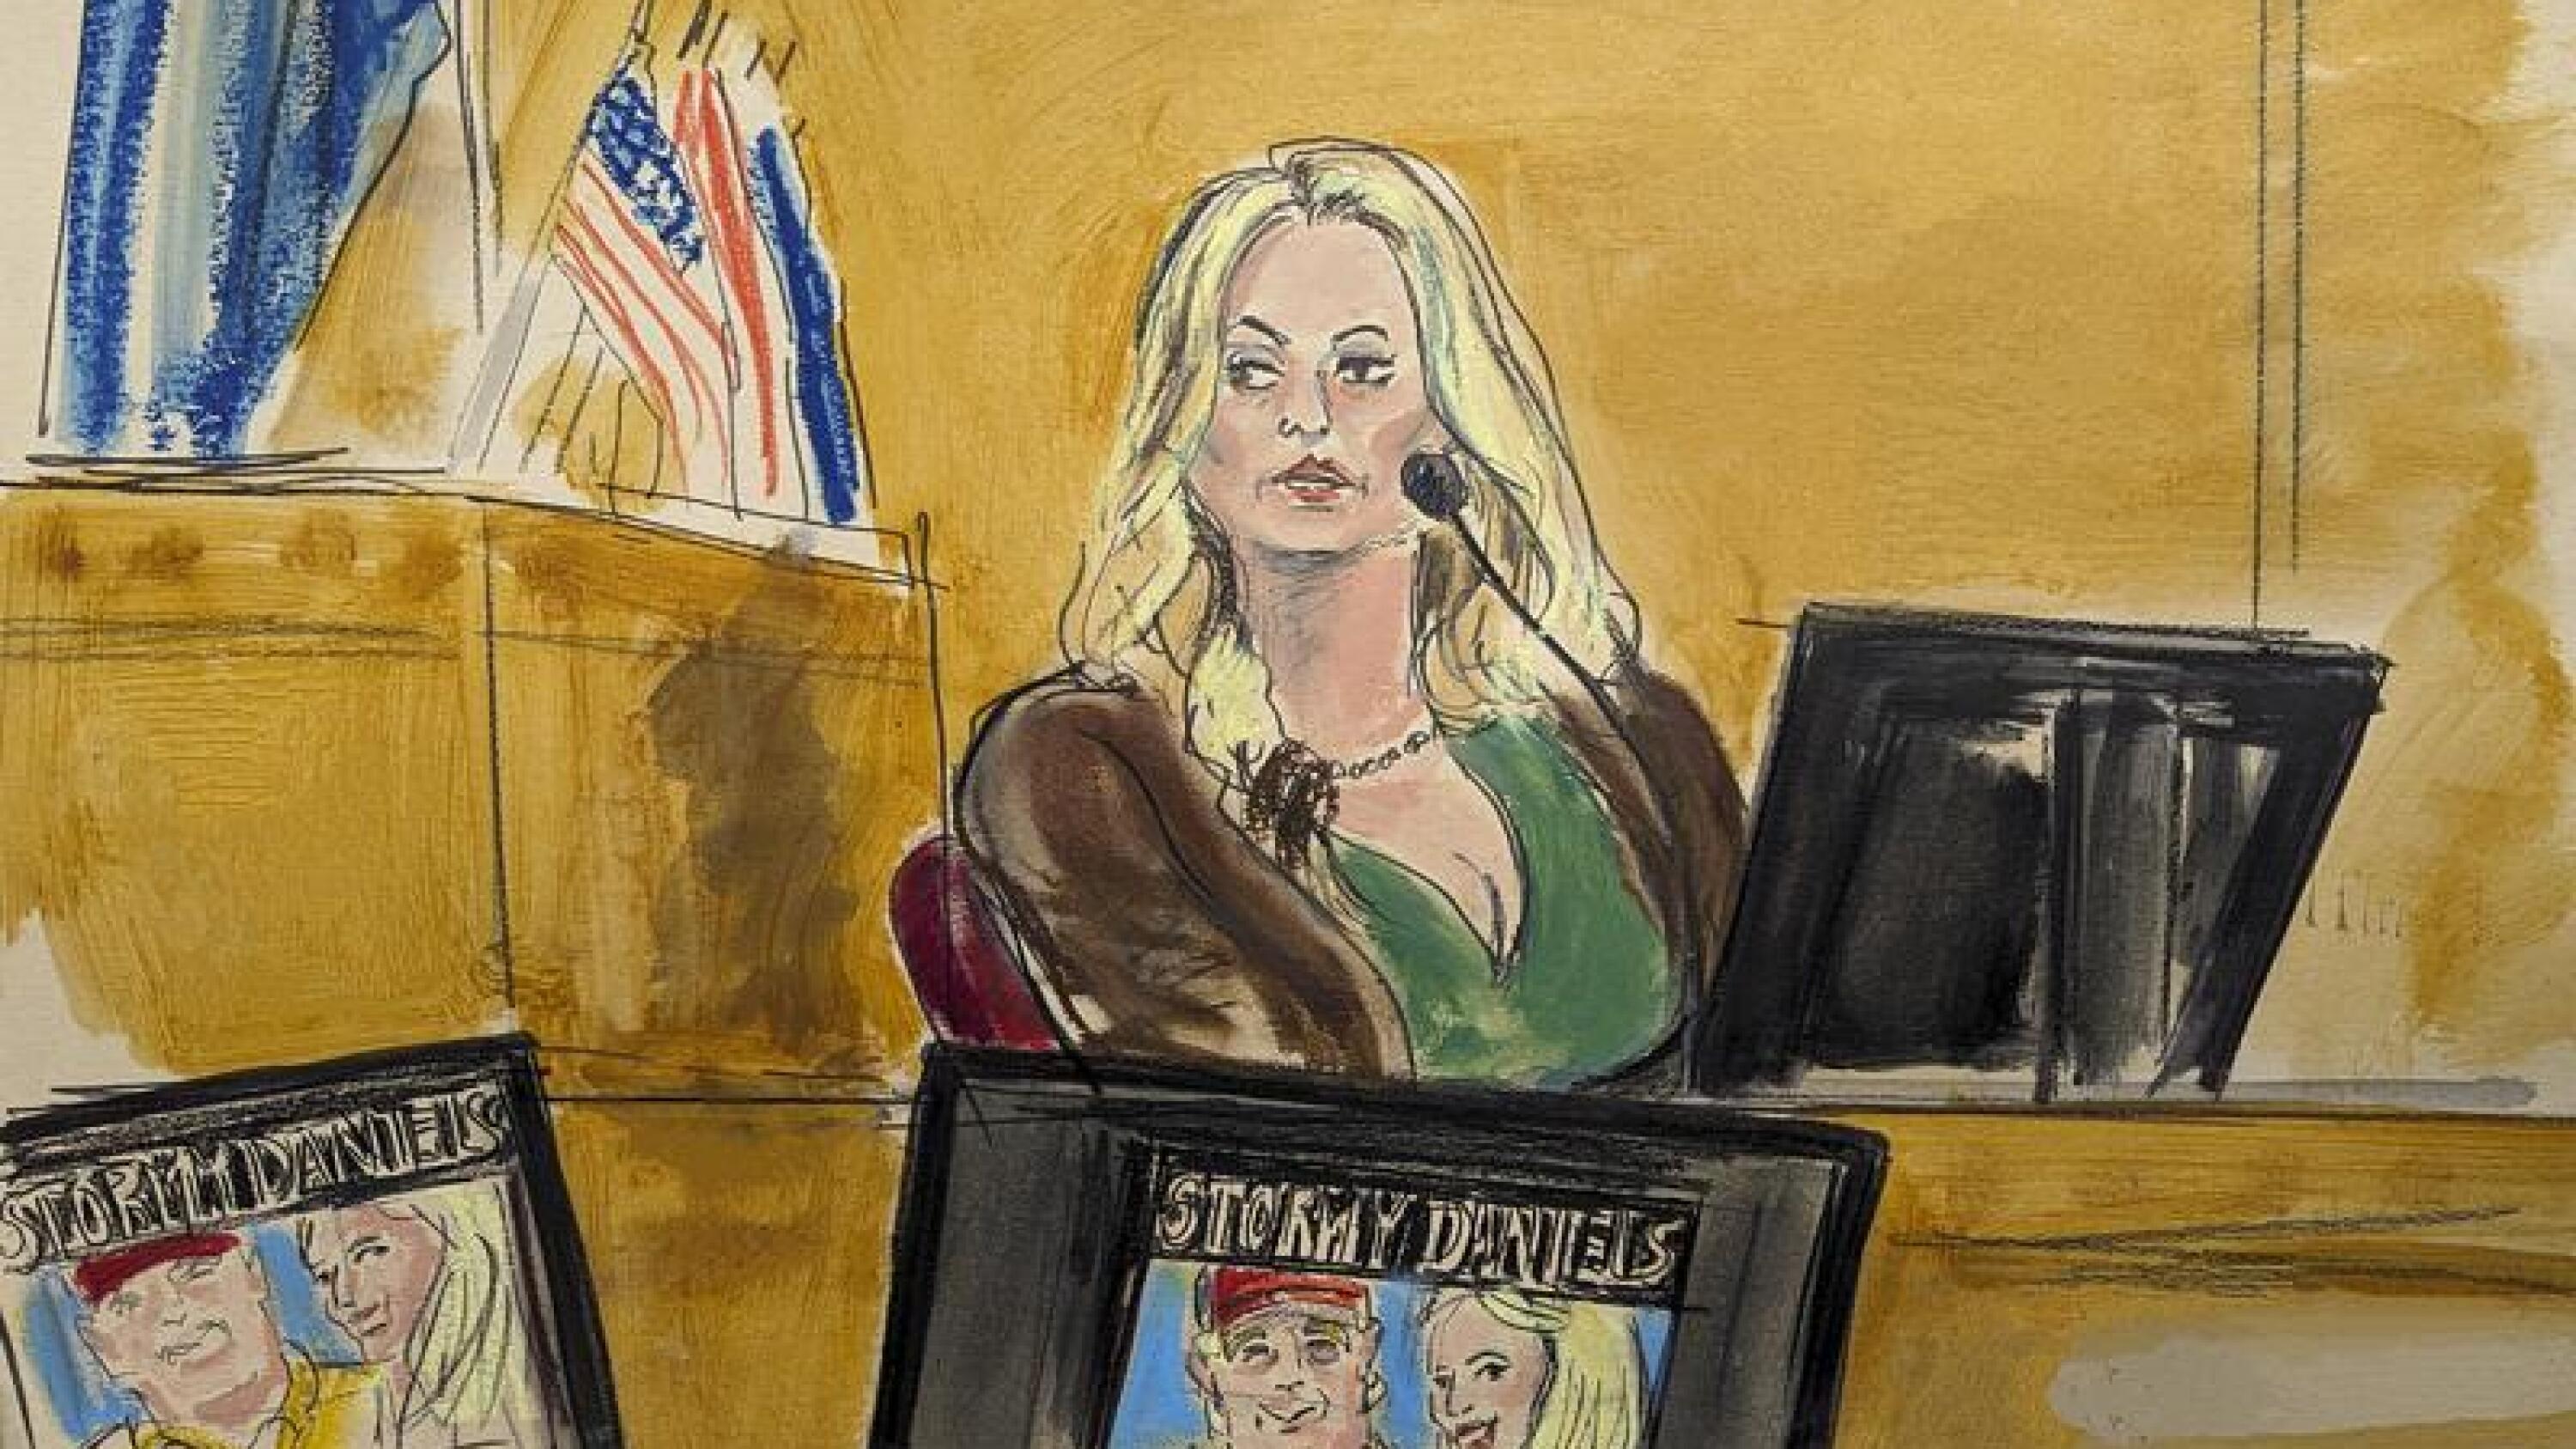 Updated: Daniels delivers shocking testimony about Trump, but trial hinges on business records